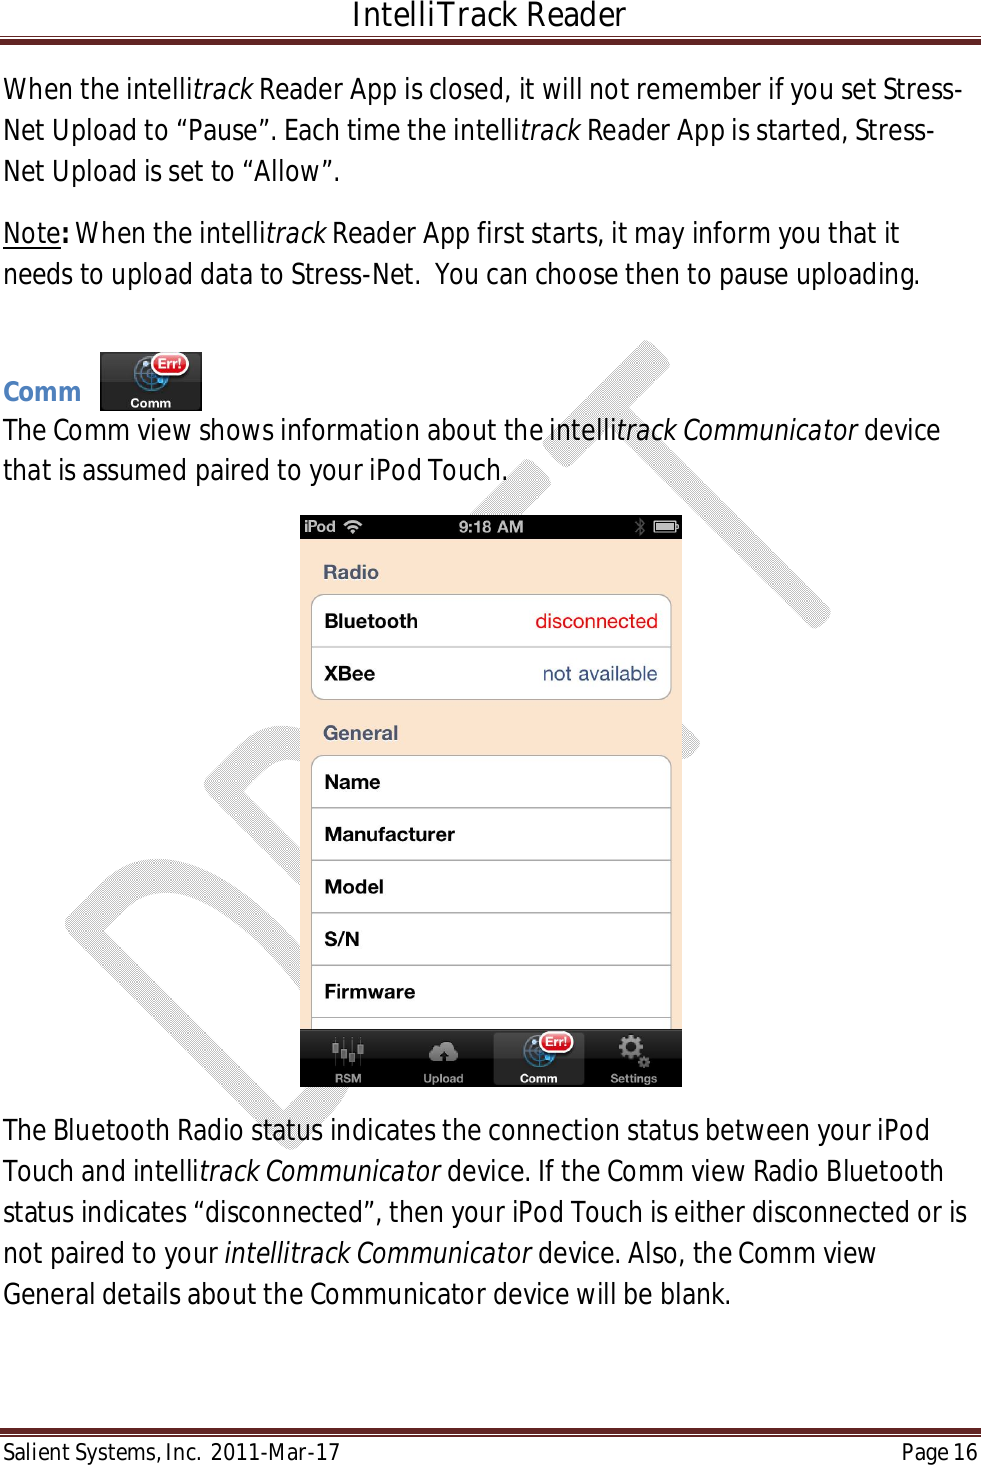 IntelliTrack Reader  Salient Systems, Inc.  2011-Mar-17 Page 16  When the intellitrack Reader App is closed, it will not remember if you set Stress-Net Upload to “Pause”. Each time the intellitrack Reader App is started, Stress-Net Upload is set to “Allow”. Note: When the intellitrack Reader App first starts, it may inform you that it needs to upload data to Stress-Net.  You can choose then to pause uploading.  Comm The Comm view shows information about the intellitrack Communicator device that is assumed paired to your iPod Touch.    The Bluetooth Radio status indicates the connection status between your iPod Touch and intellitrack Communicator device. If the Comm view Radio Bluetooth status indicates “disconnected”, then your iPod Touch is either disconnected or is not paired to your intellitrack Communicator device. Also, the Comm view General details about the Communicator device will be blank. 